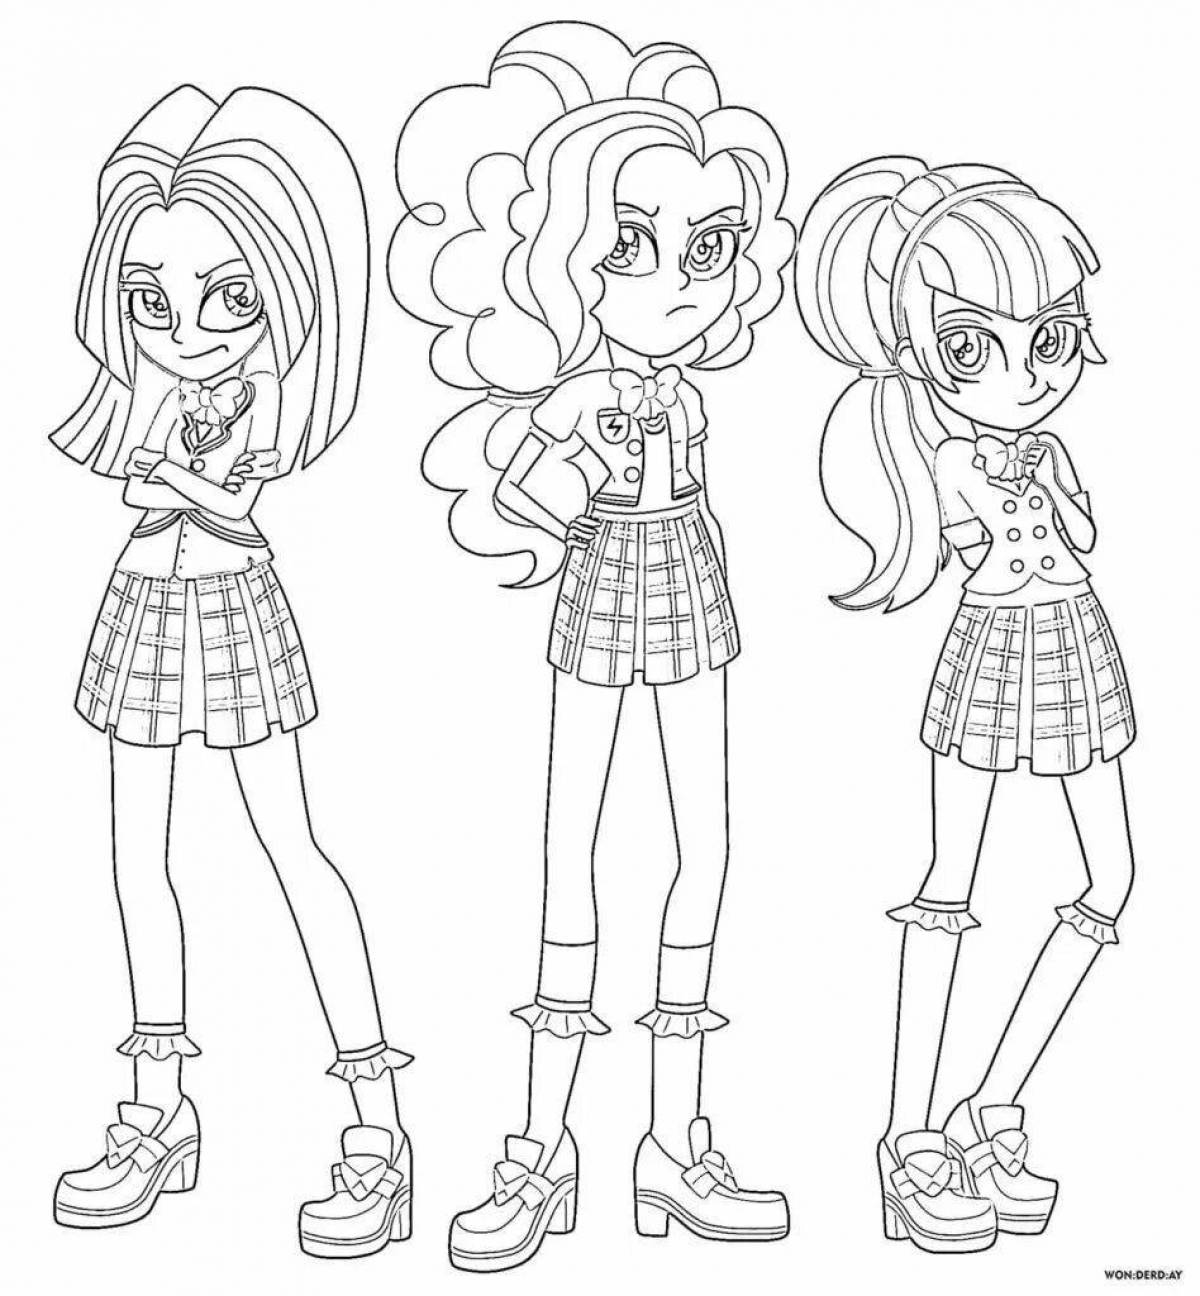 Playful equestria girls rainbow rock coloring page